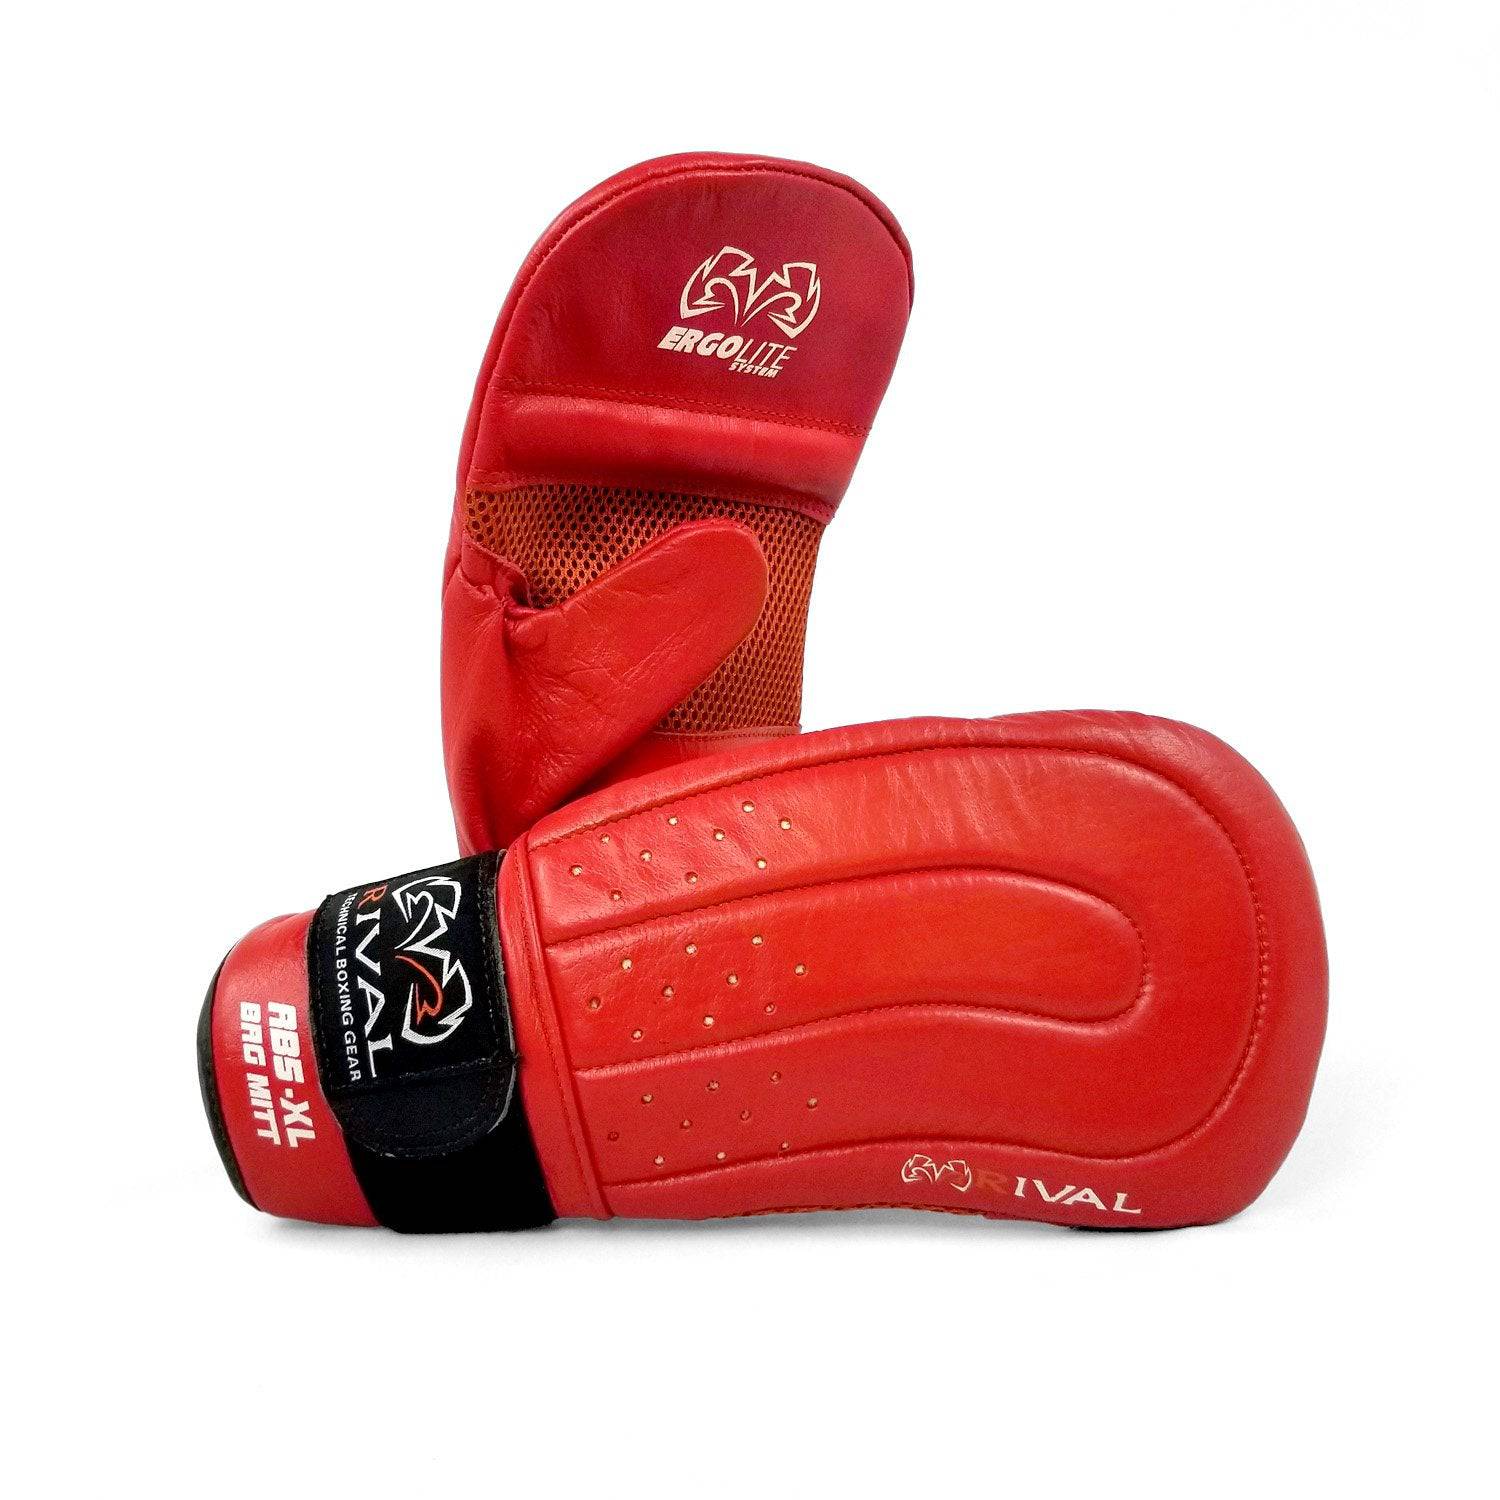 Rival | Bag Mitts - RB5 - XTC Fitness - Exercise Equipment Superstore - Canada - Bag Gloves